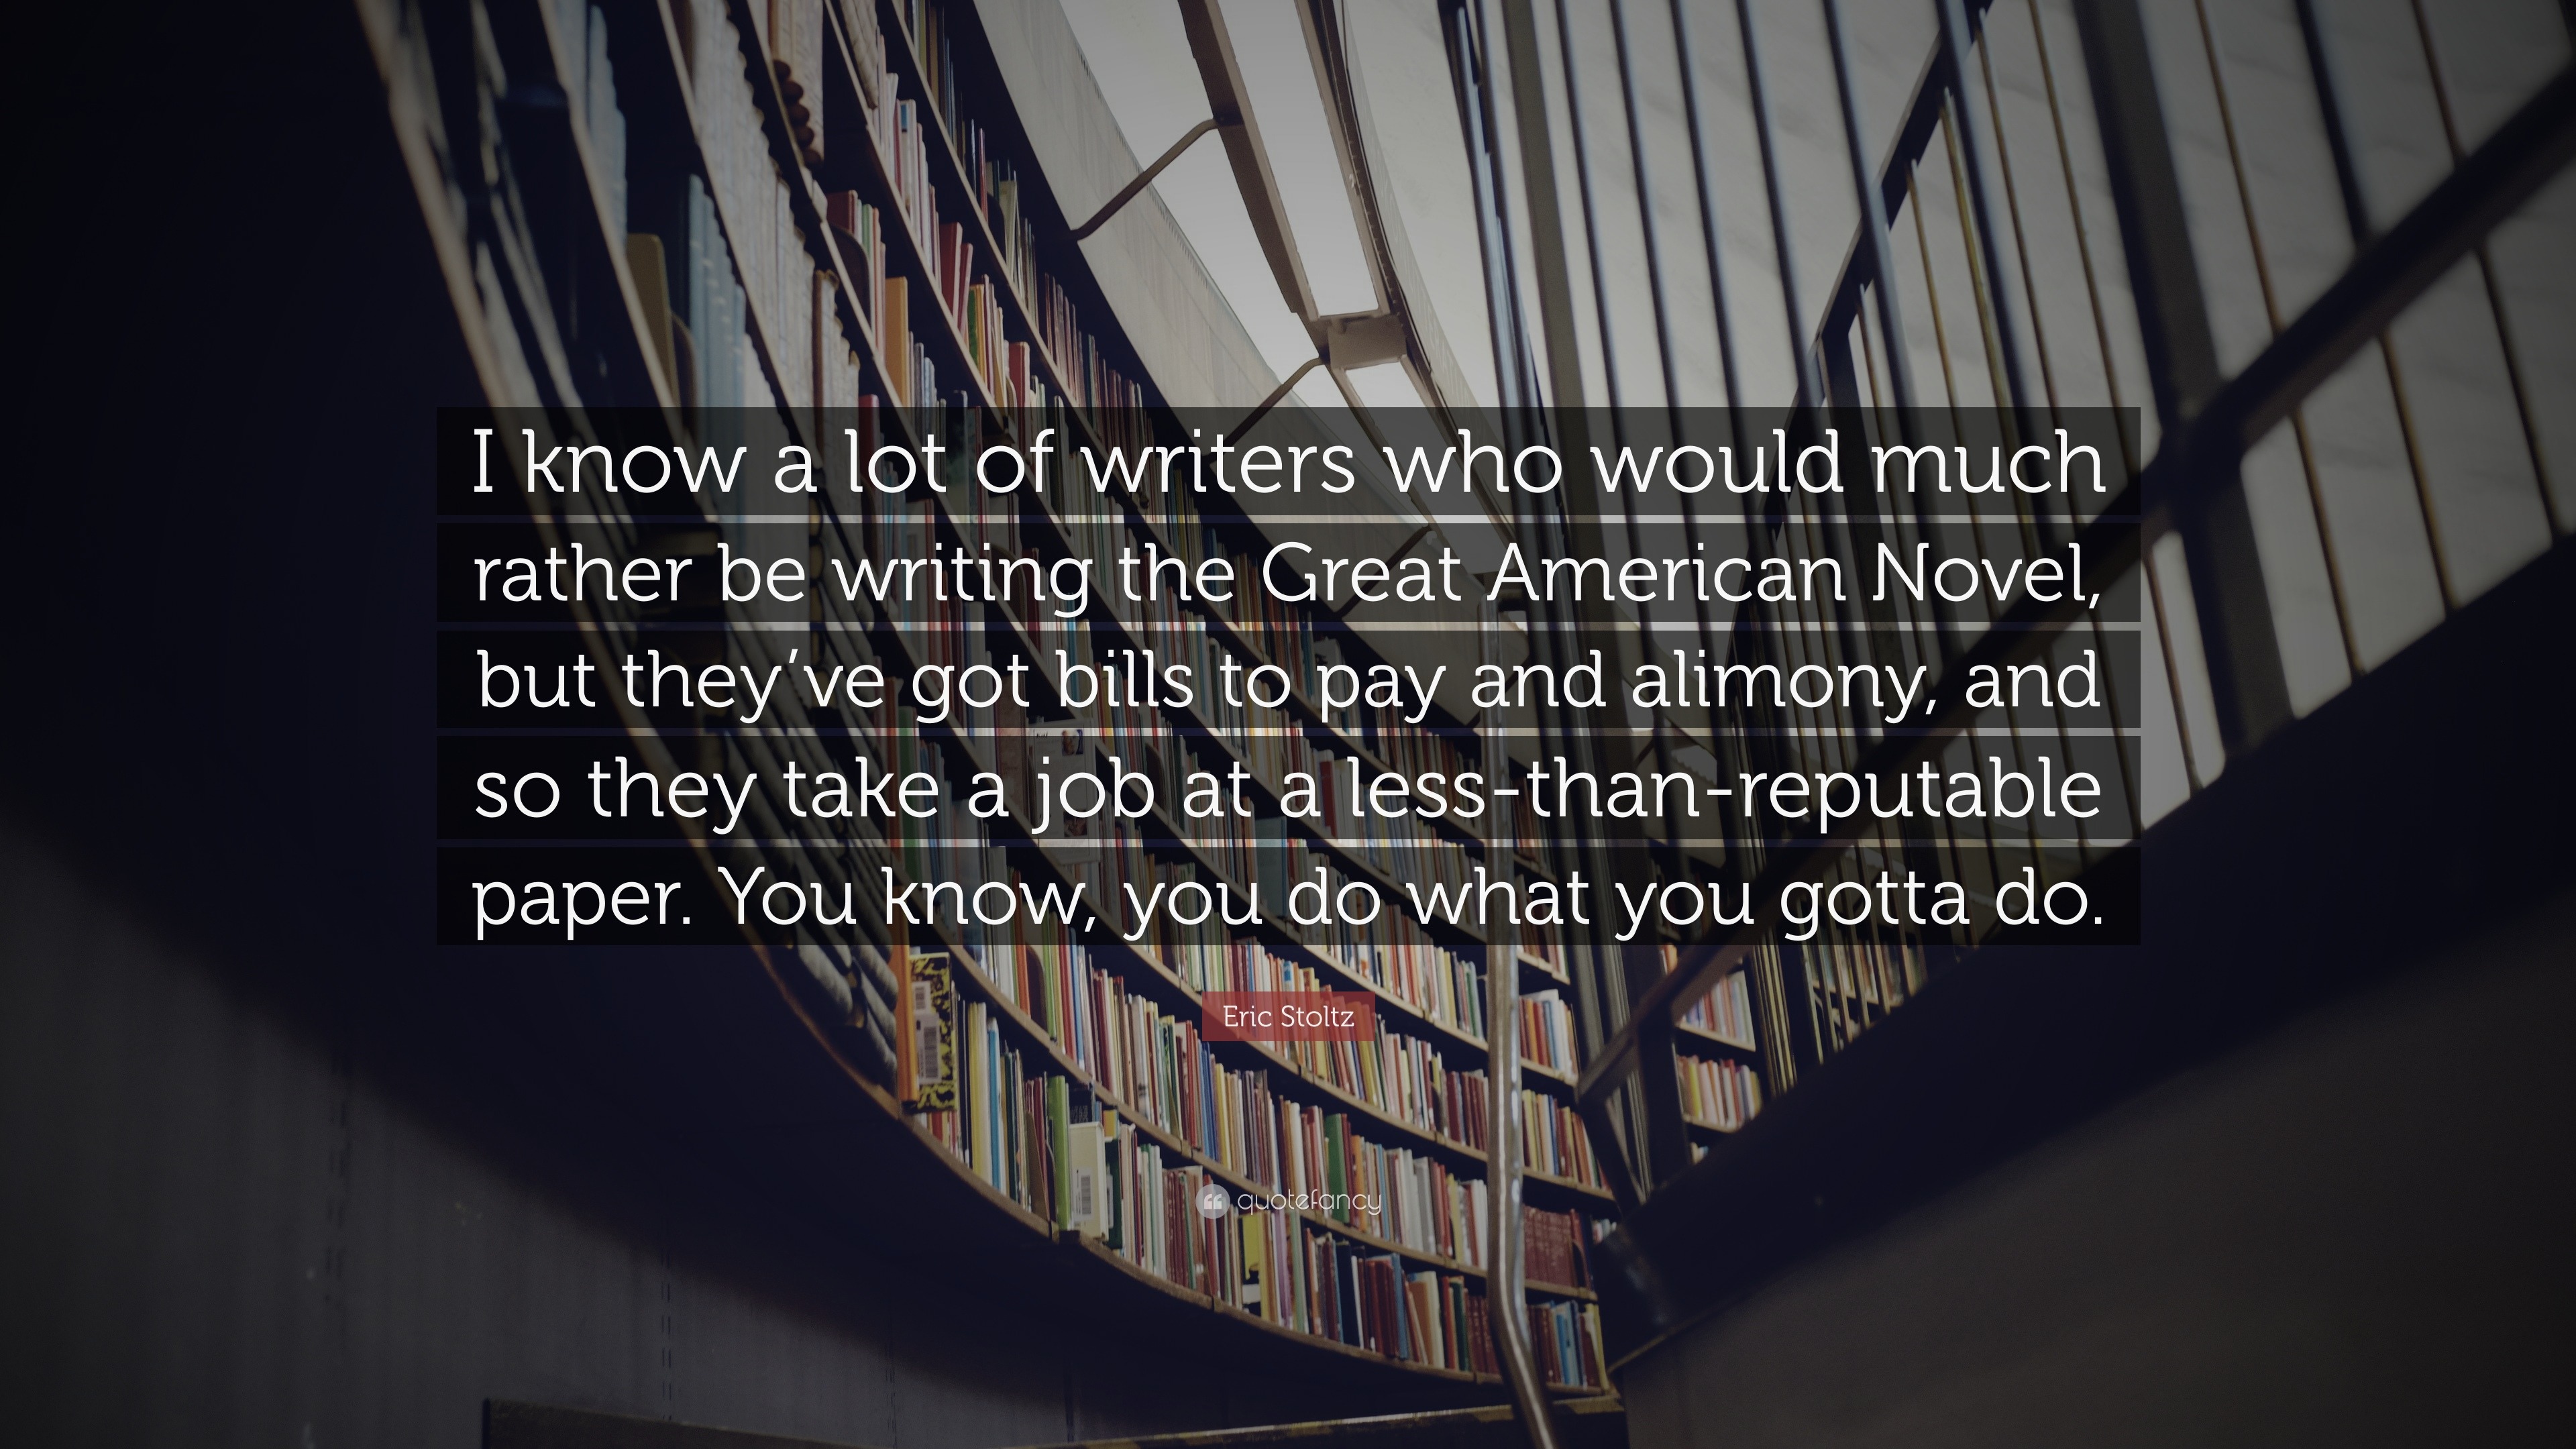 15 Famous Authors on Why They Write